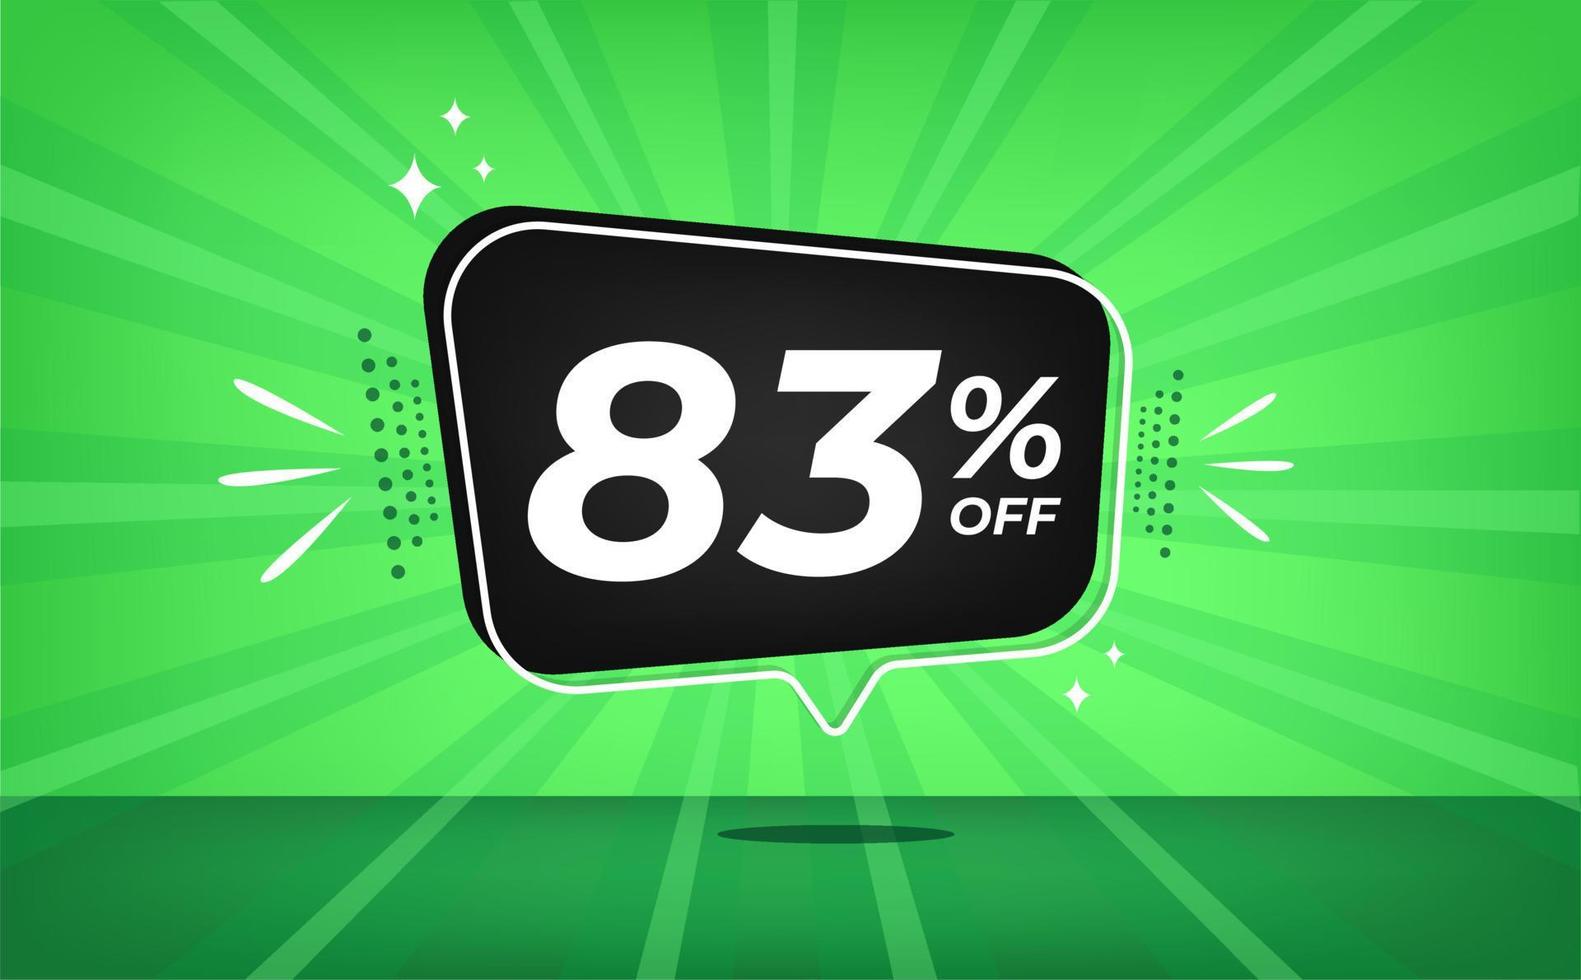 83 percent off. Green banner with eighty-three percent discount on a black balloon for mega big sales. vector